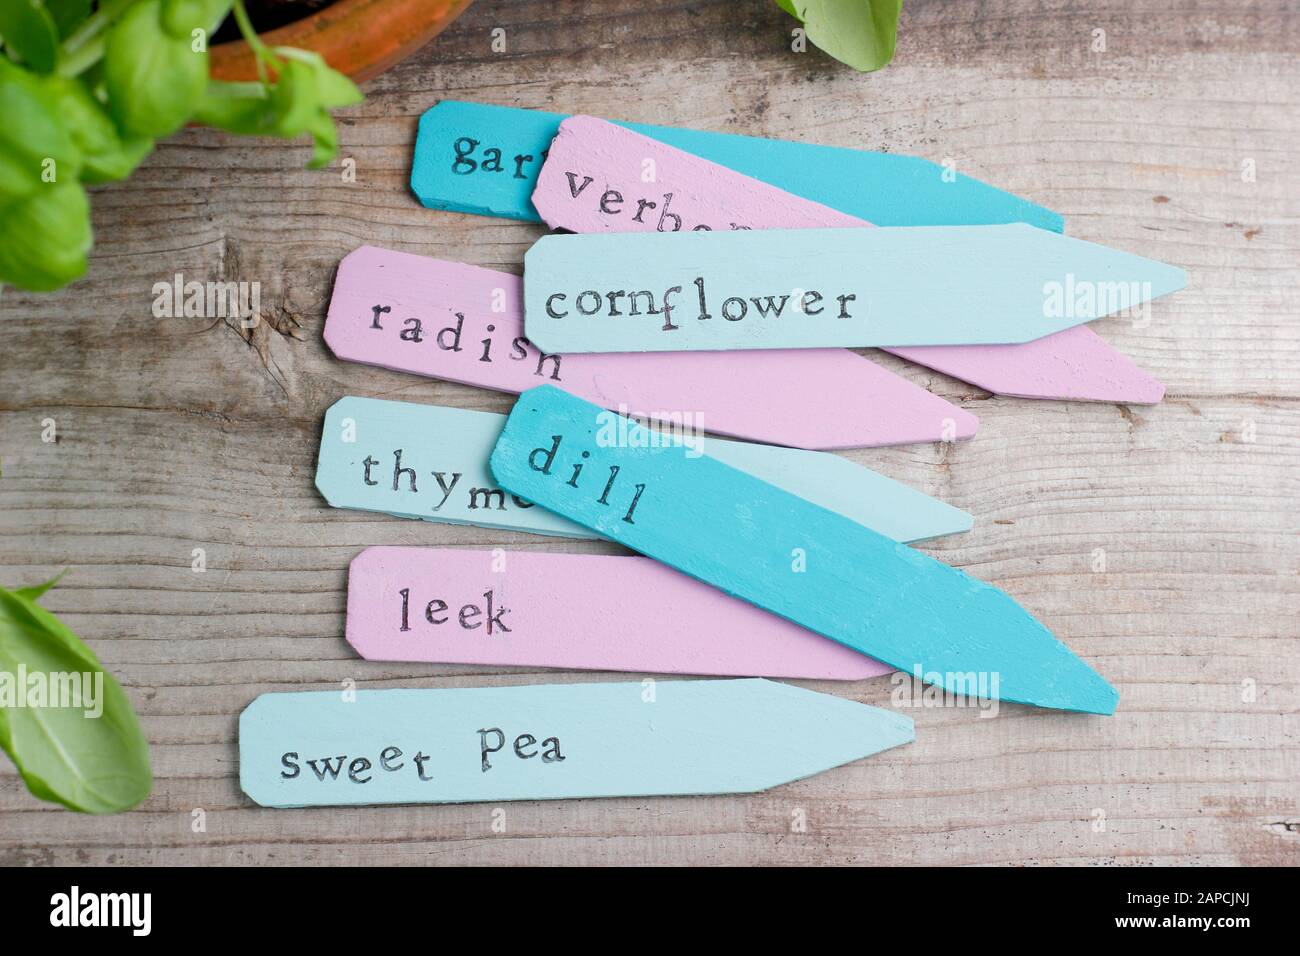 Wooden plant labels recycled using paint and a letter stamper. Stock Photo